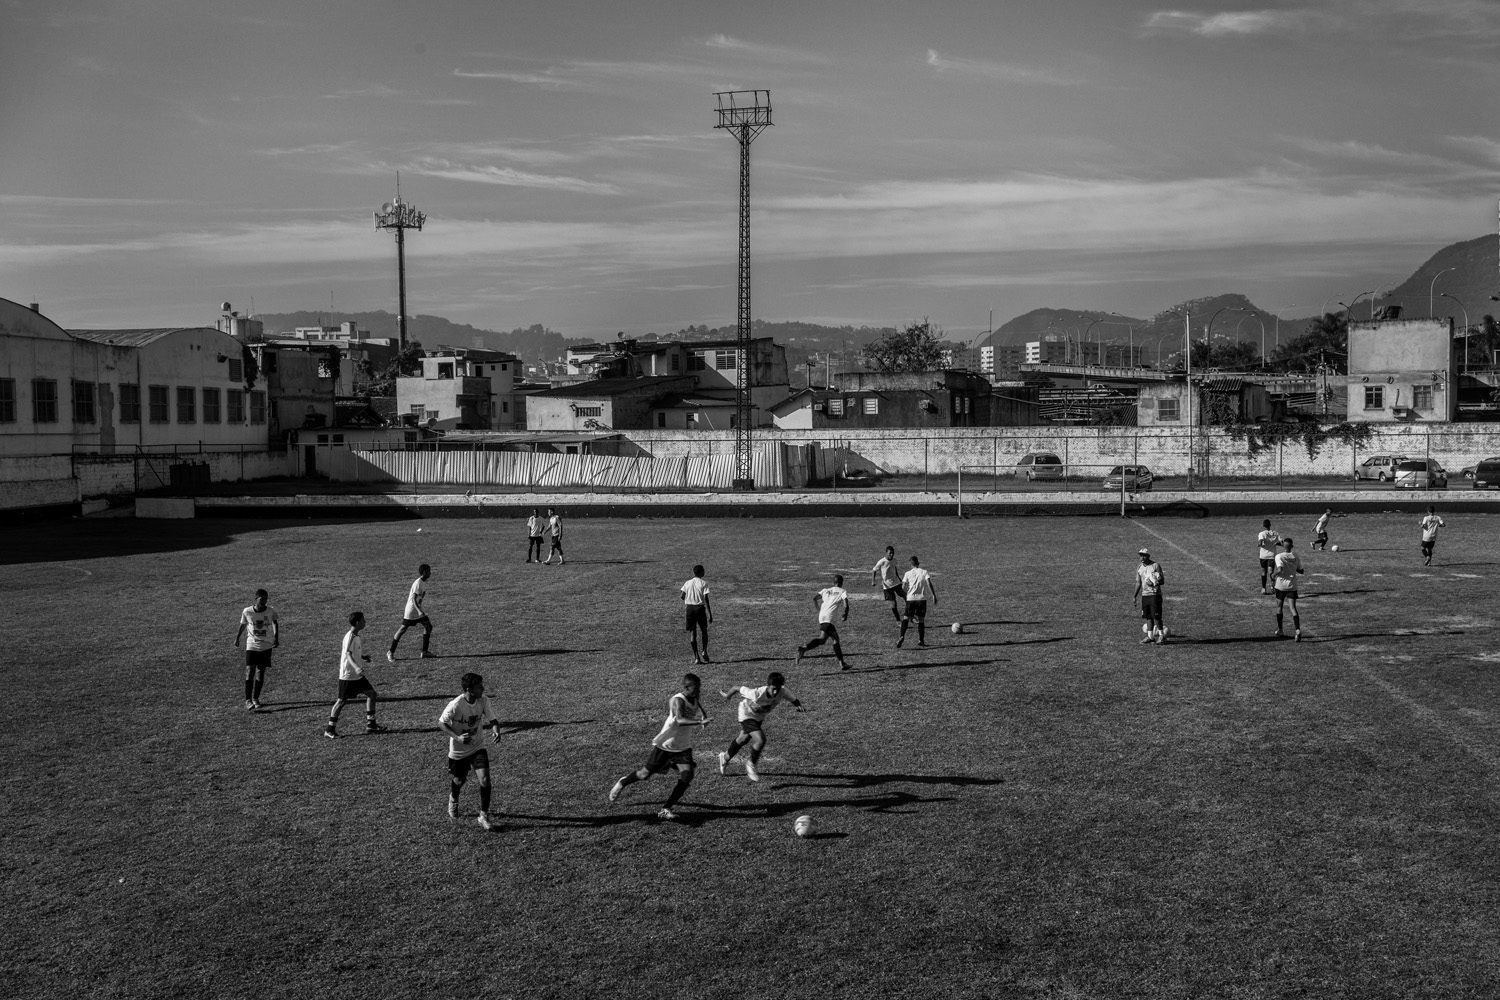 RIO DE JANEIRO, BRAZIL - MAY 2014: Soccer players training in the Sao Cristovao Soccer Team, the older socer team in Brazil which was the team of the world famous player Ronaldo when he was a kid. Today it´s an important school for young talents who wants to be success professional players in Europe. (Photo by Sebastián Liste/ Reportage by Getty Images)